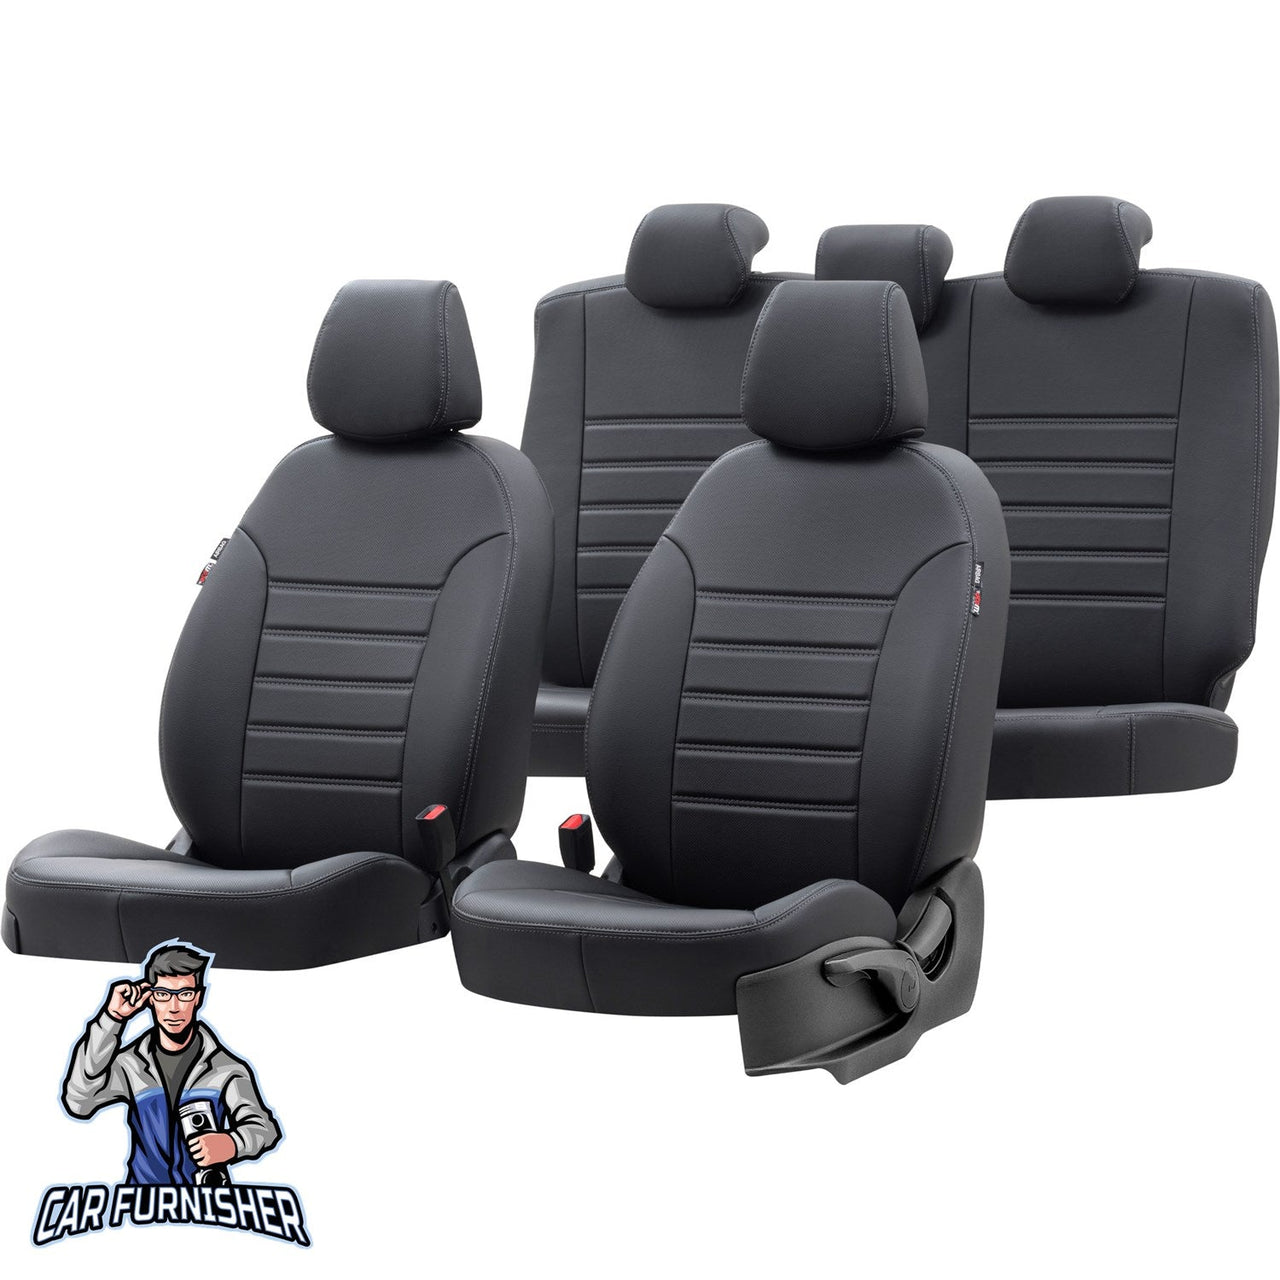 Jeep Compass Seat Covers Istanbul Leather Design Black Leather